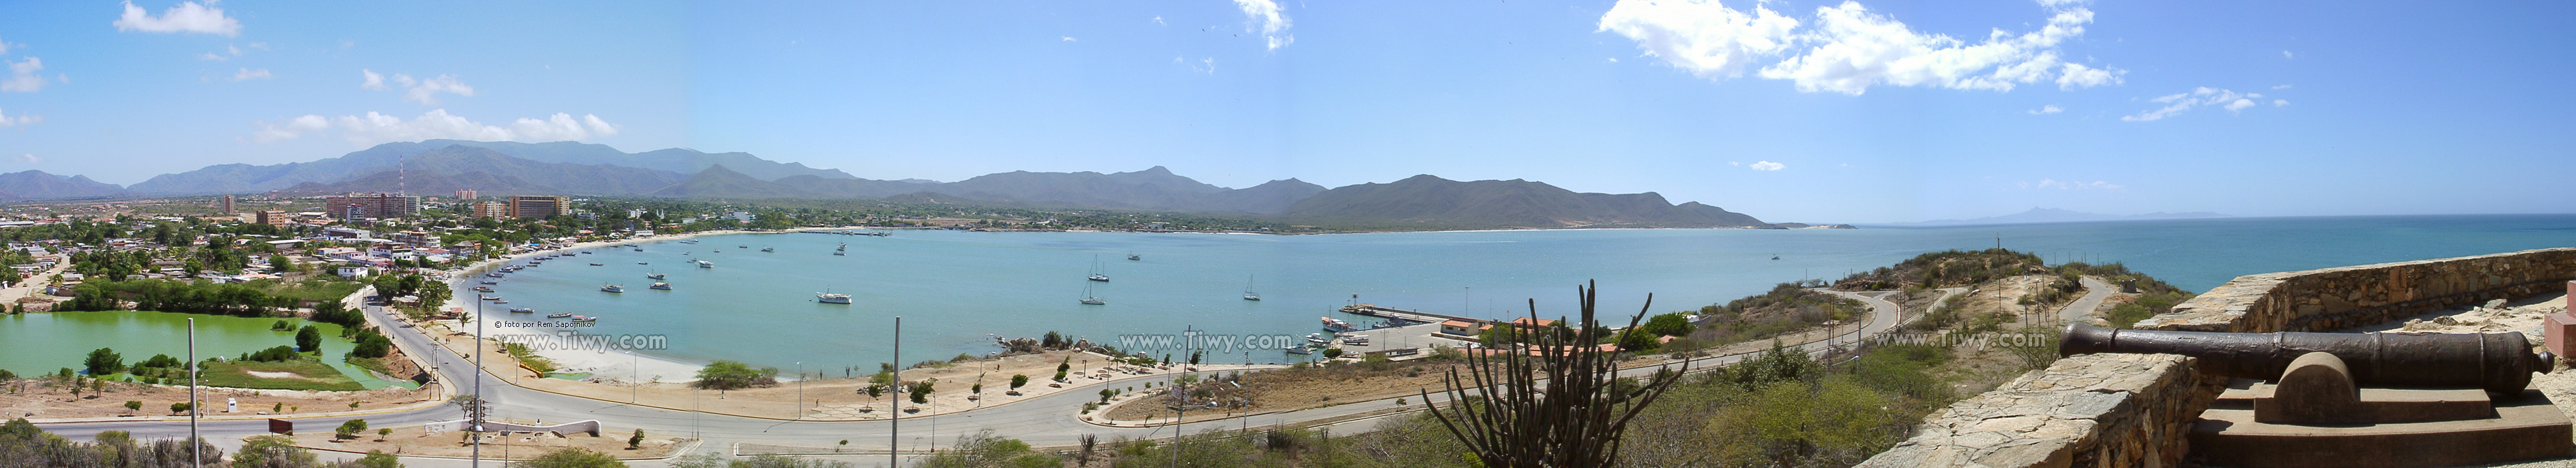 the bay Galera view and the town of Juan Griego